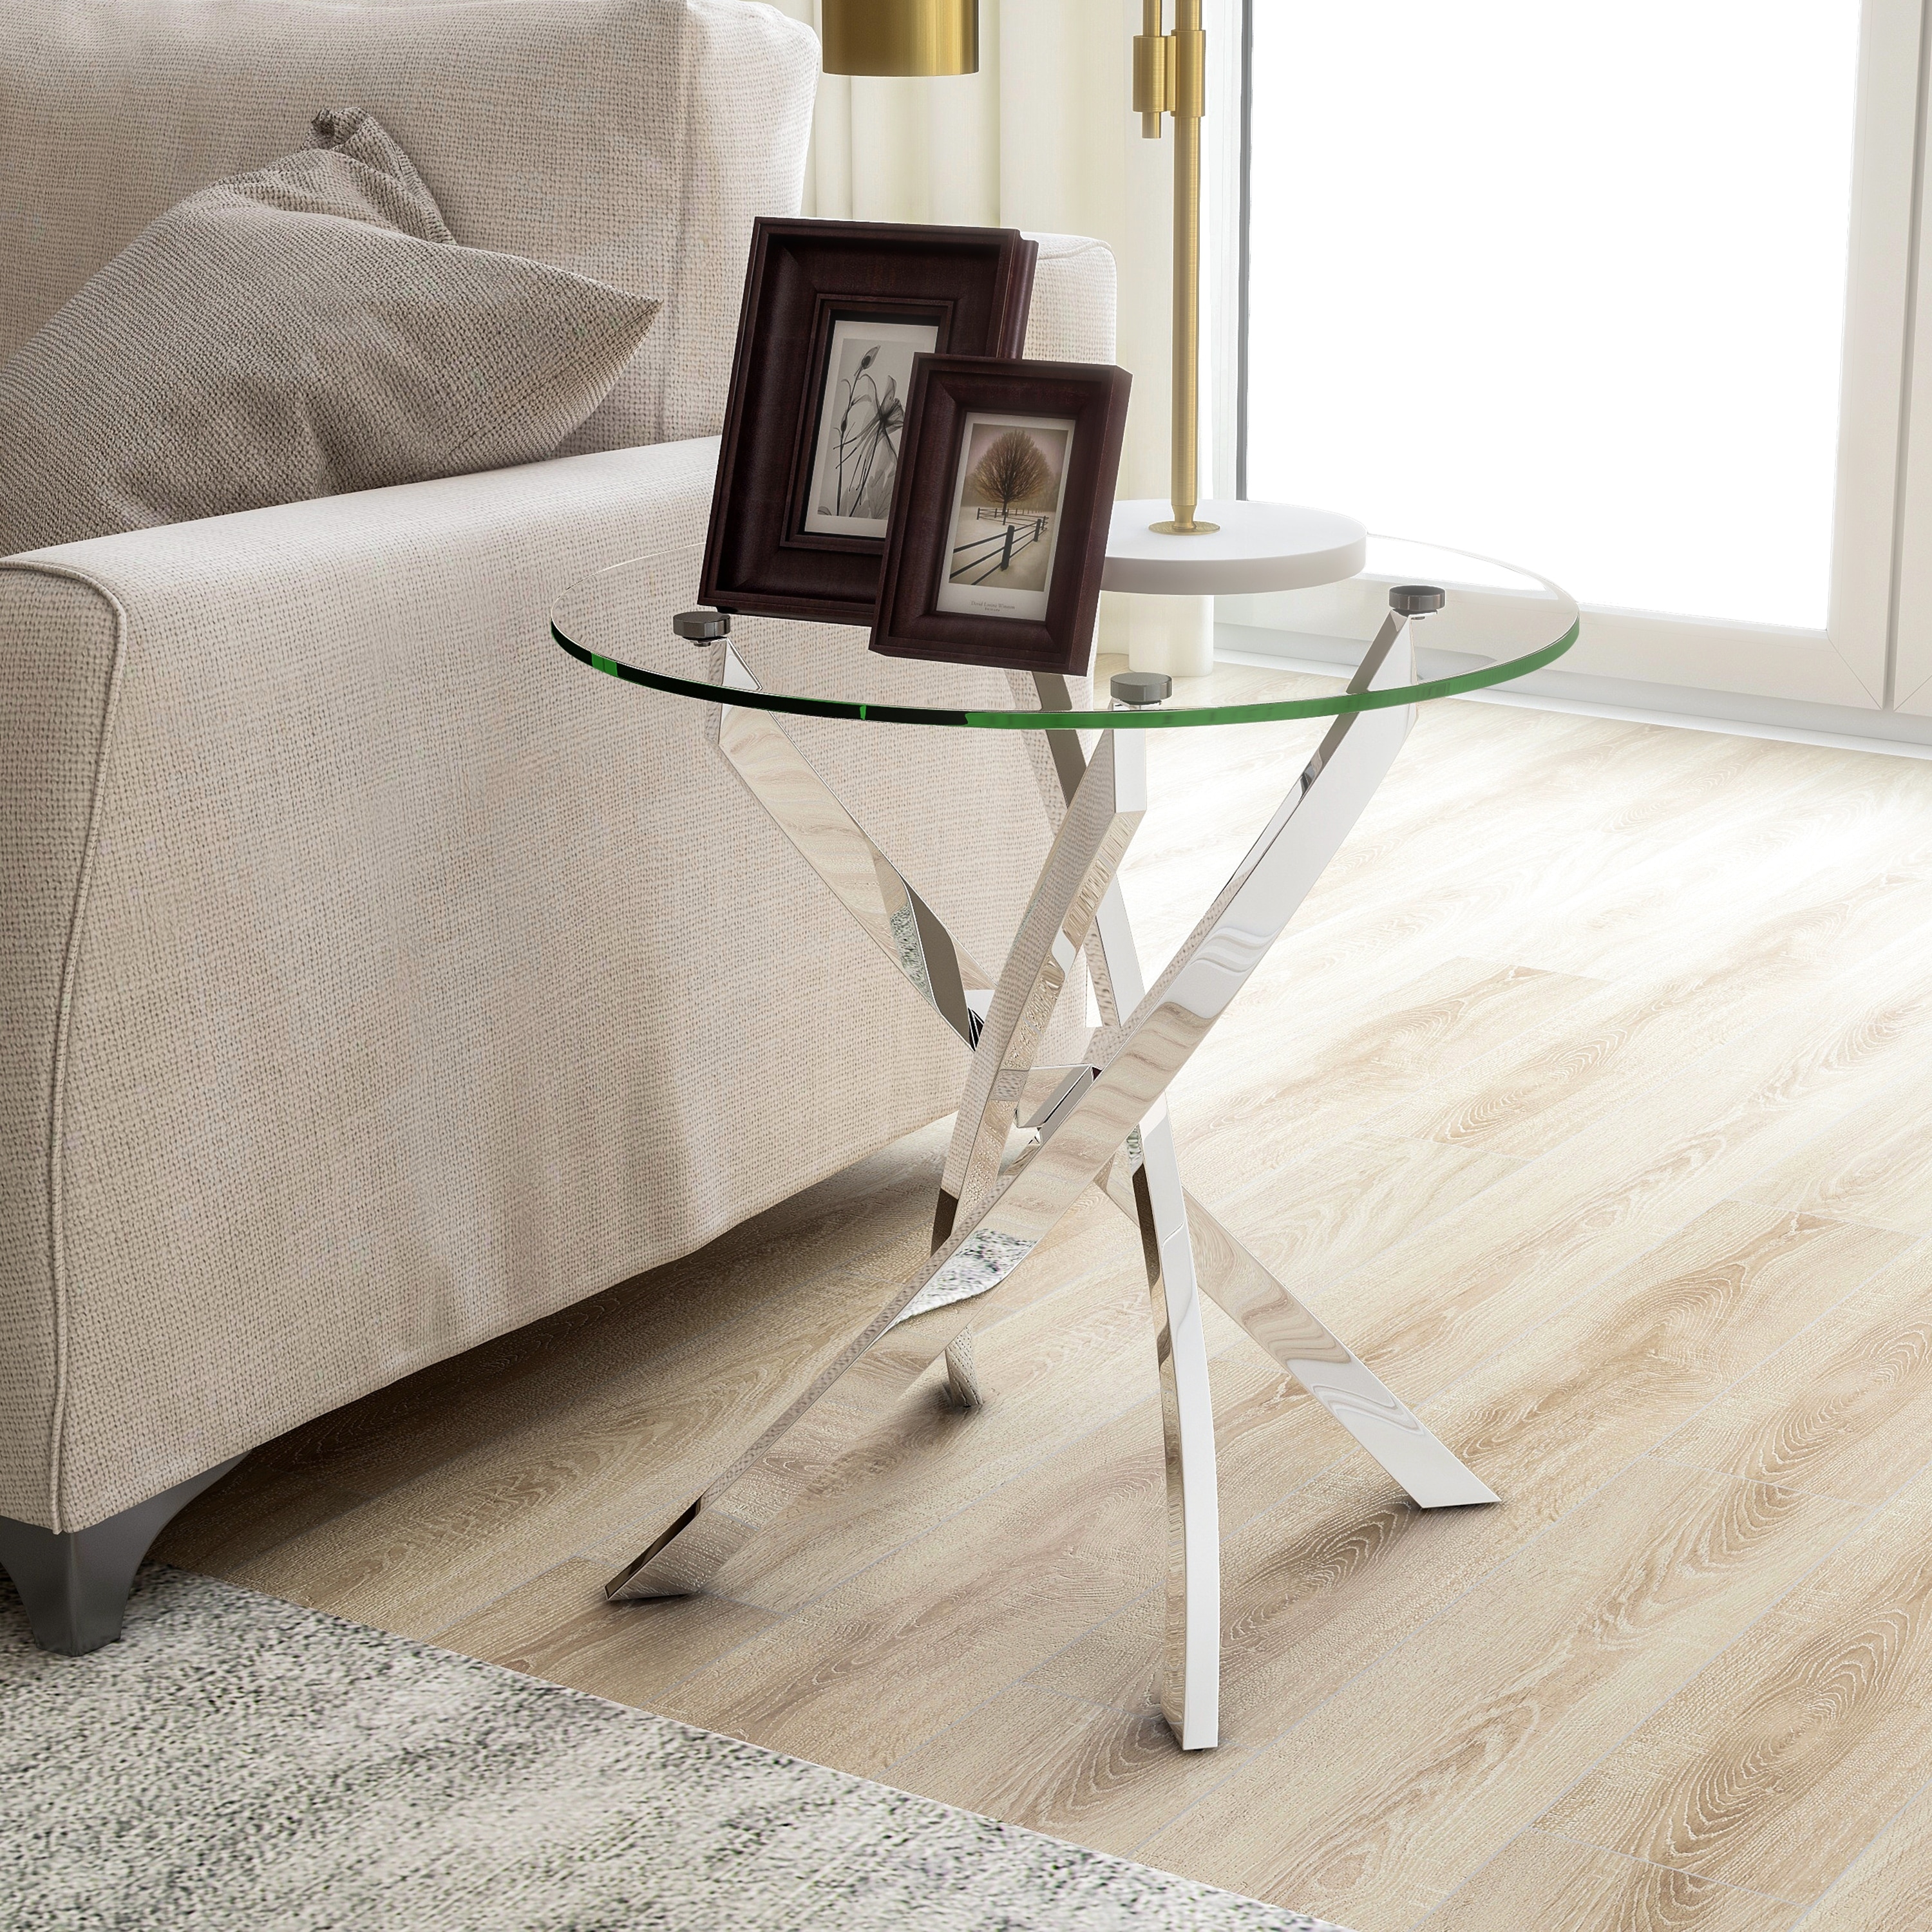 Furniture of America Dess Modern Chrome X-cross Round Side Table -  Overstock - 14538642